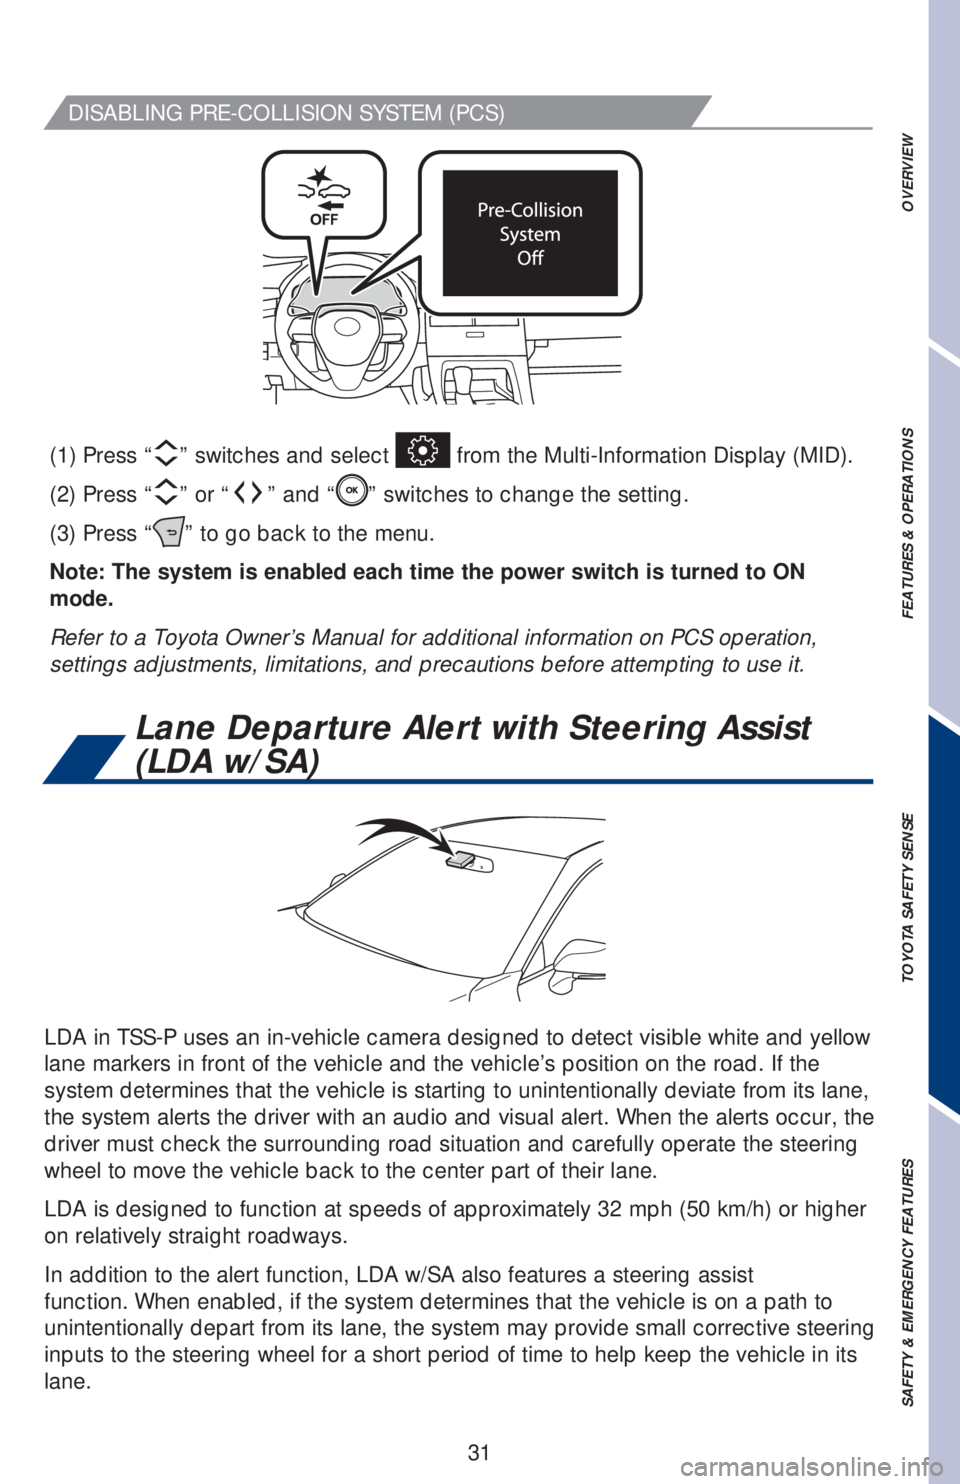 TOYOTA AVALON HYBRID 2019   (in English) Owners Guide 31
DISABLING PRE-COLLISION SYSTEM (PCS)
LDA in TSS-P uses an in-vehicle camera designed to detect visible white and yellow 
lane markers in front of the vehicle and the vehicle’s position on the roa